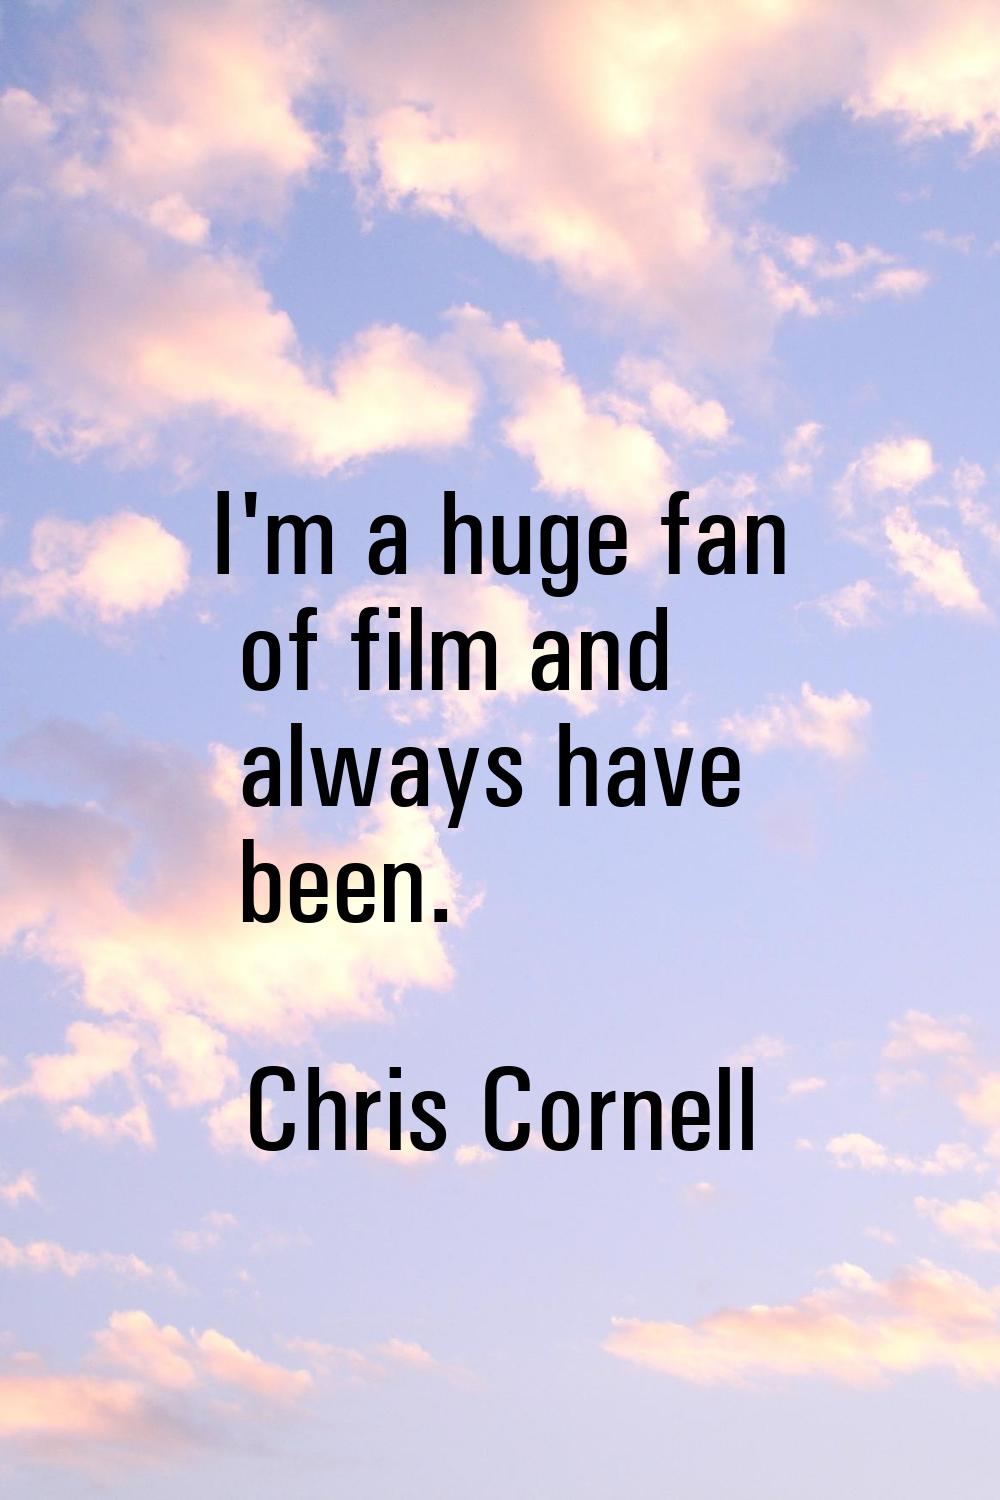 I'm a huge fan of film and always have been.